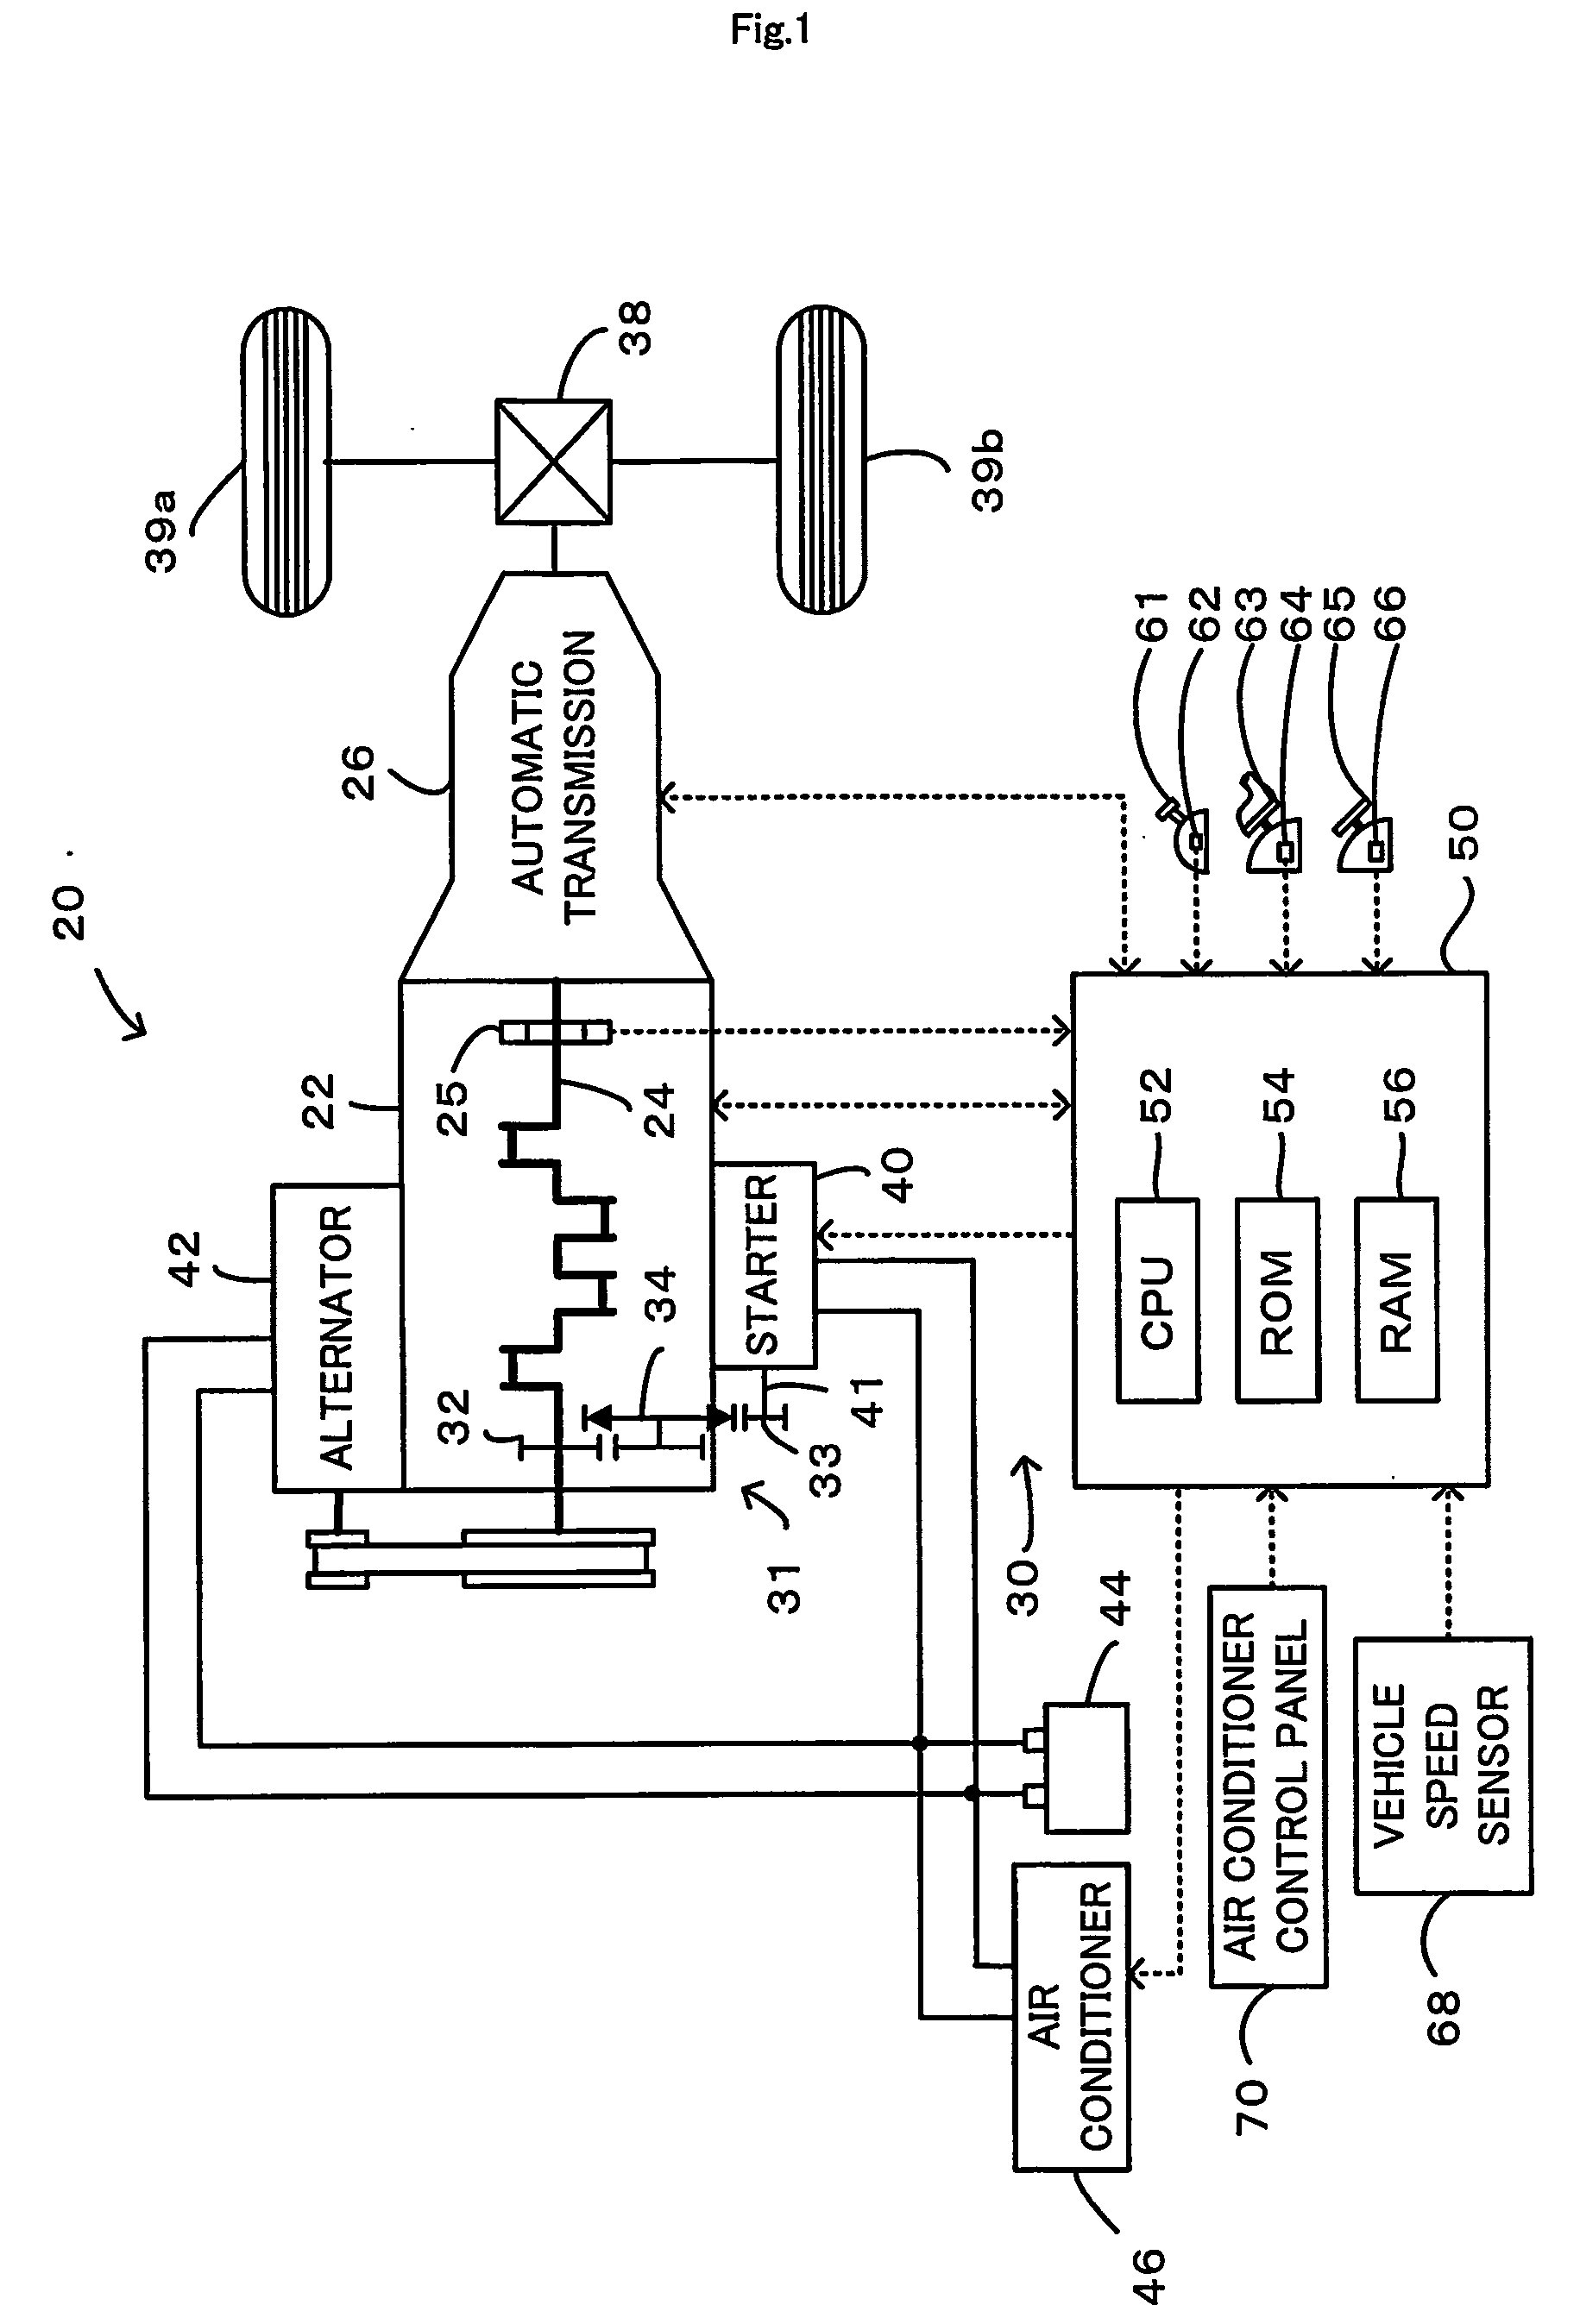 Starting apparatus for internal combustion engine and automobile